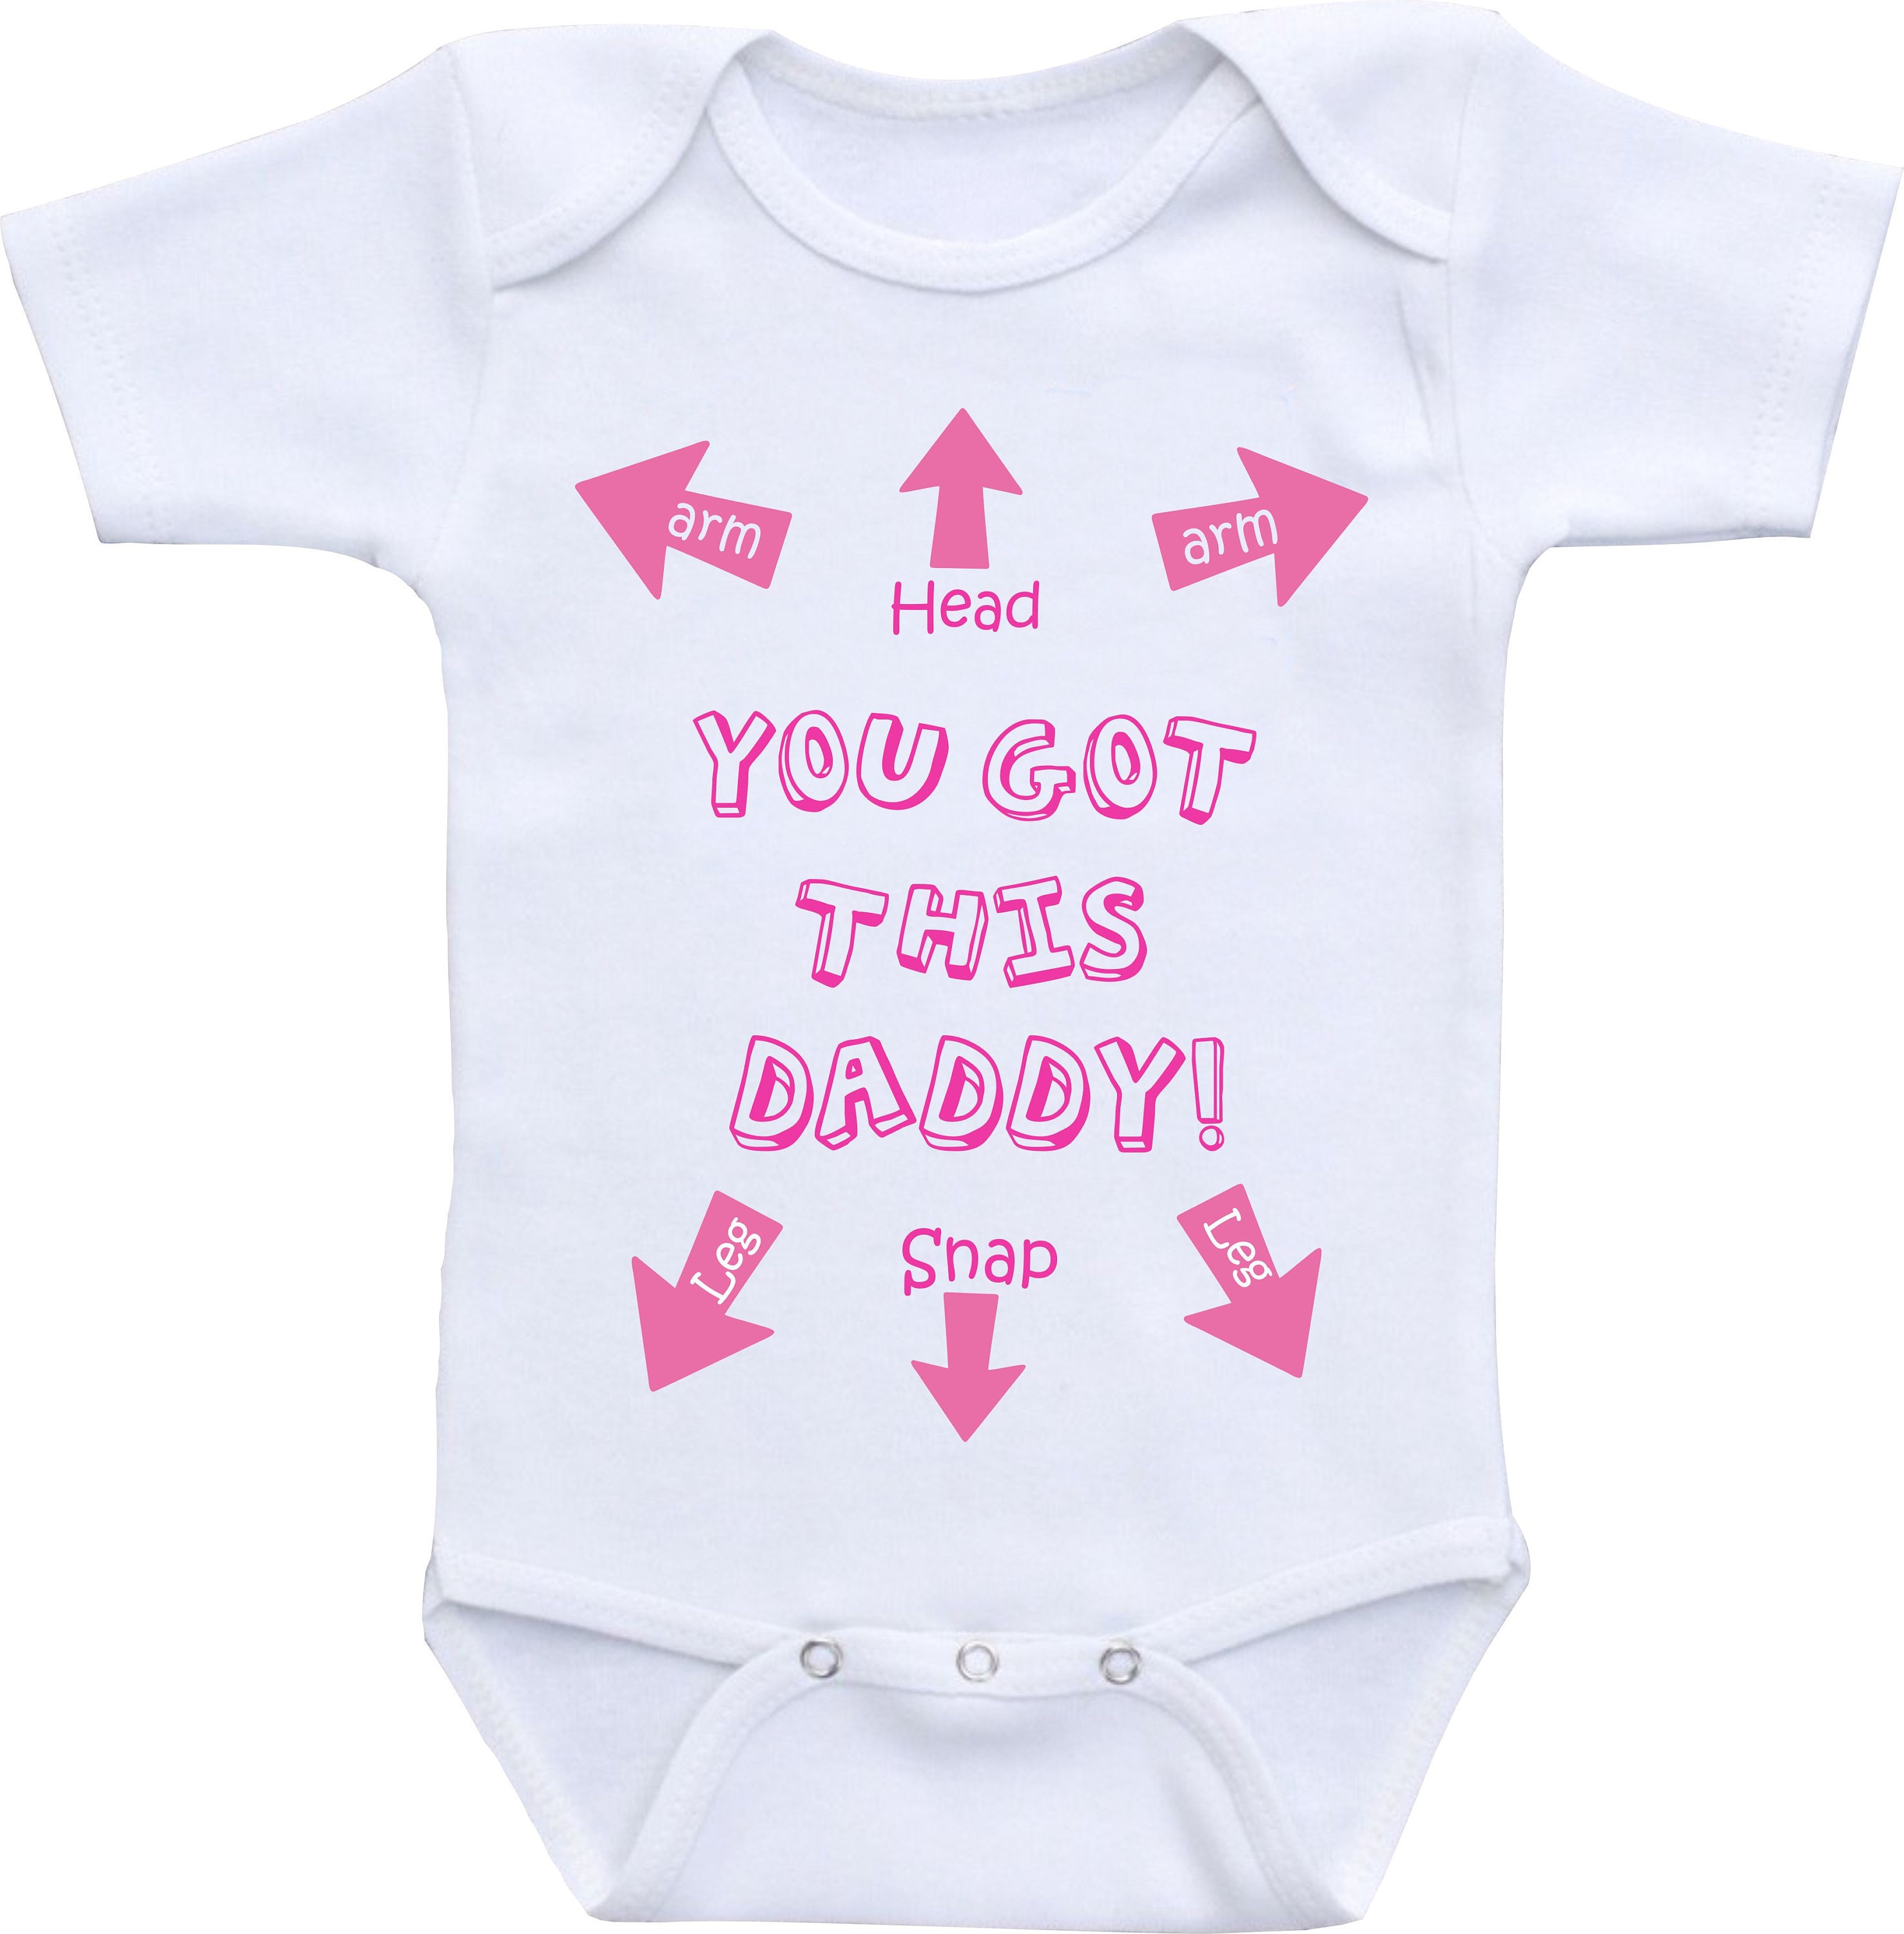 Fathers Day Gift Boho Arrows Bodysuit Cute Baby Clothes Baby Girl Outfit Baby Shower Gift New Daddy Father Creeper Daddys Girl Boho Onesie 